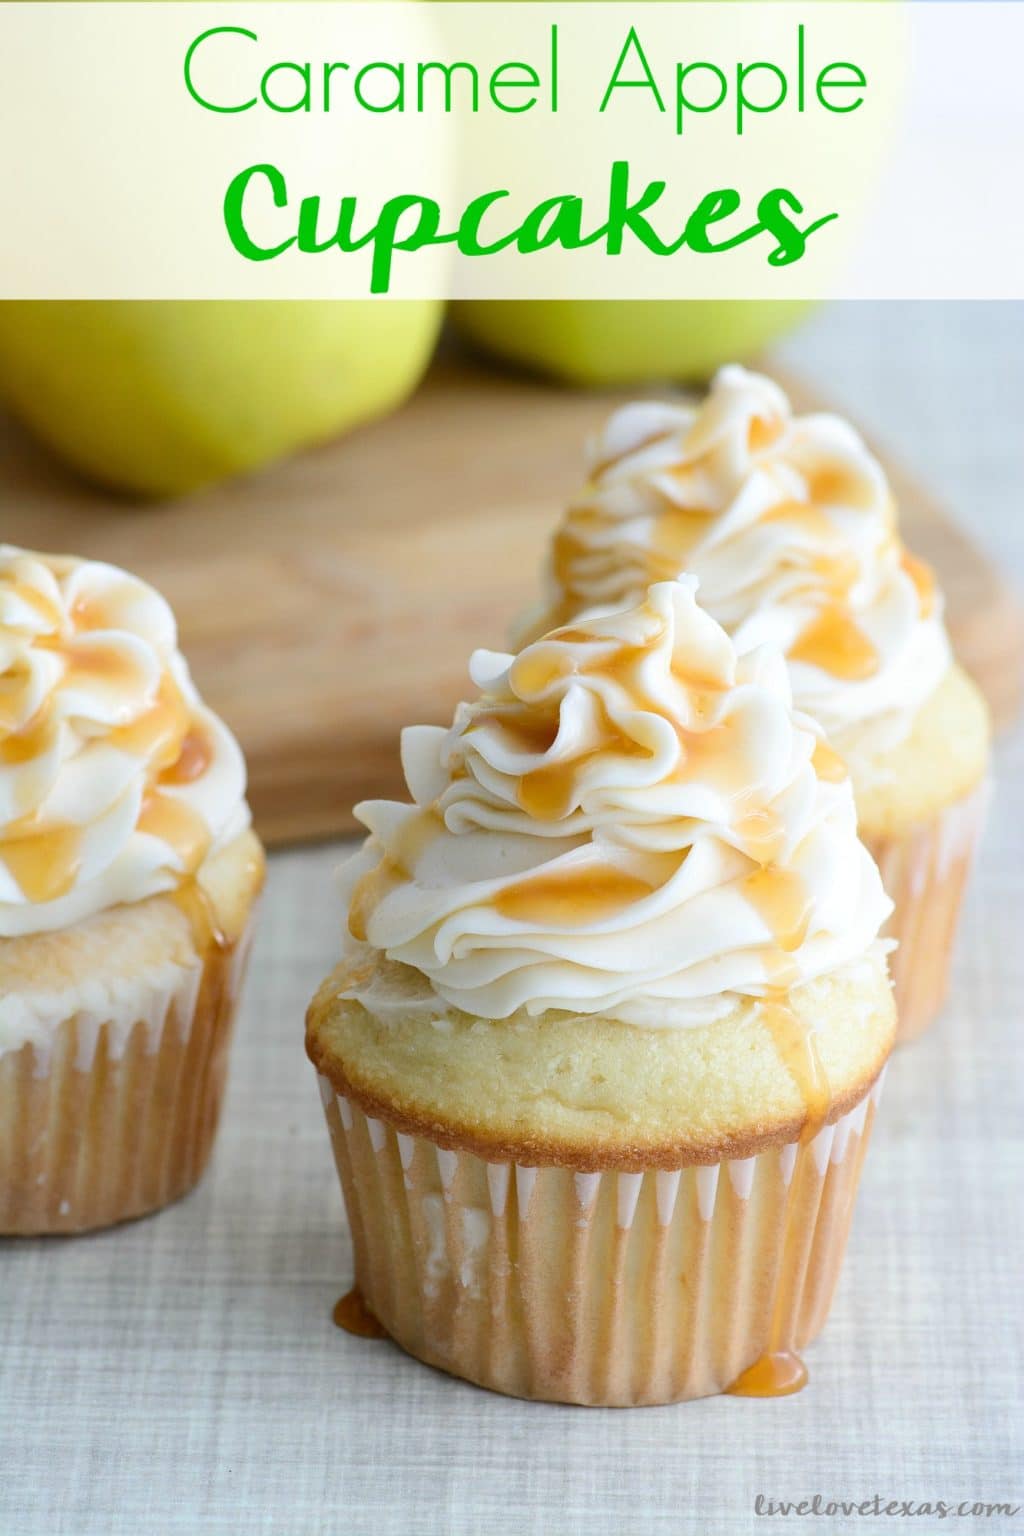 When you think of fall, what flavors come to mind? Apples and caramel are two of my favorites and combined in this easy Caramel Apple Cupcakes recipe! #cupcake #cupcakes #easycupcakes #caramel #apple #caramelaple #fallcupcakes #cupcakerecipes #applerecipes #caramelrecipes #apple #recipe #recipes #fallrecipes #thanksgivingfood 